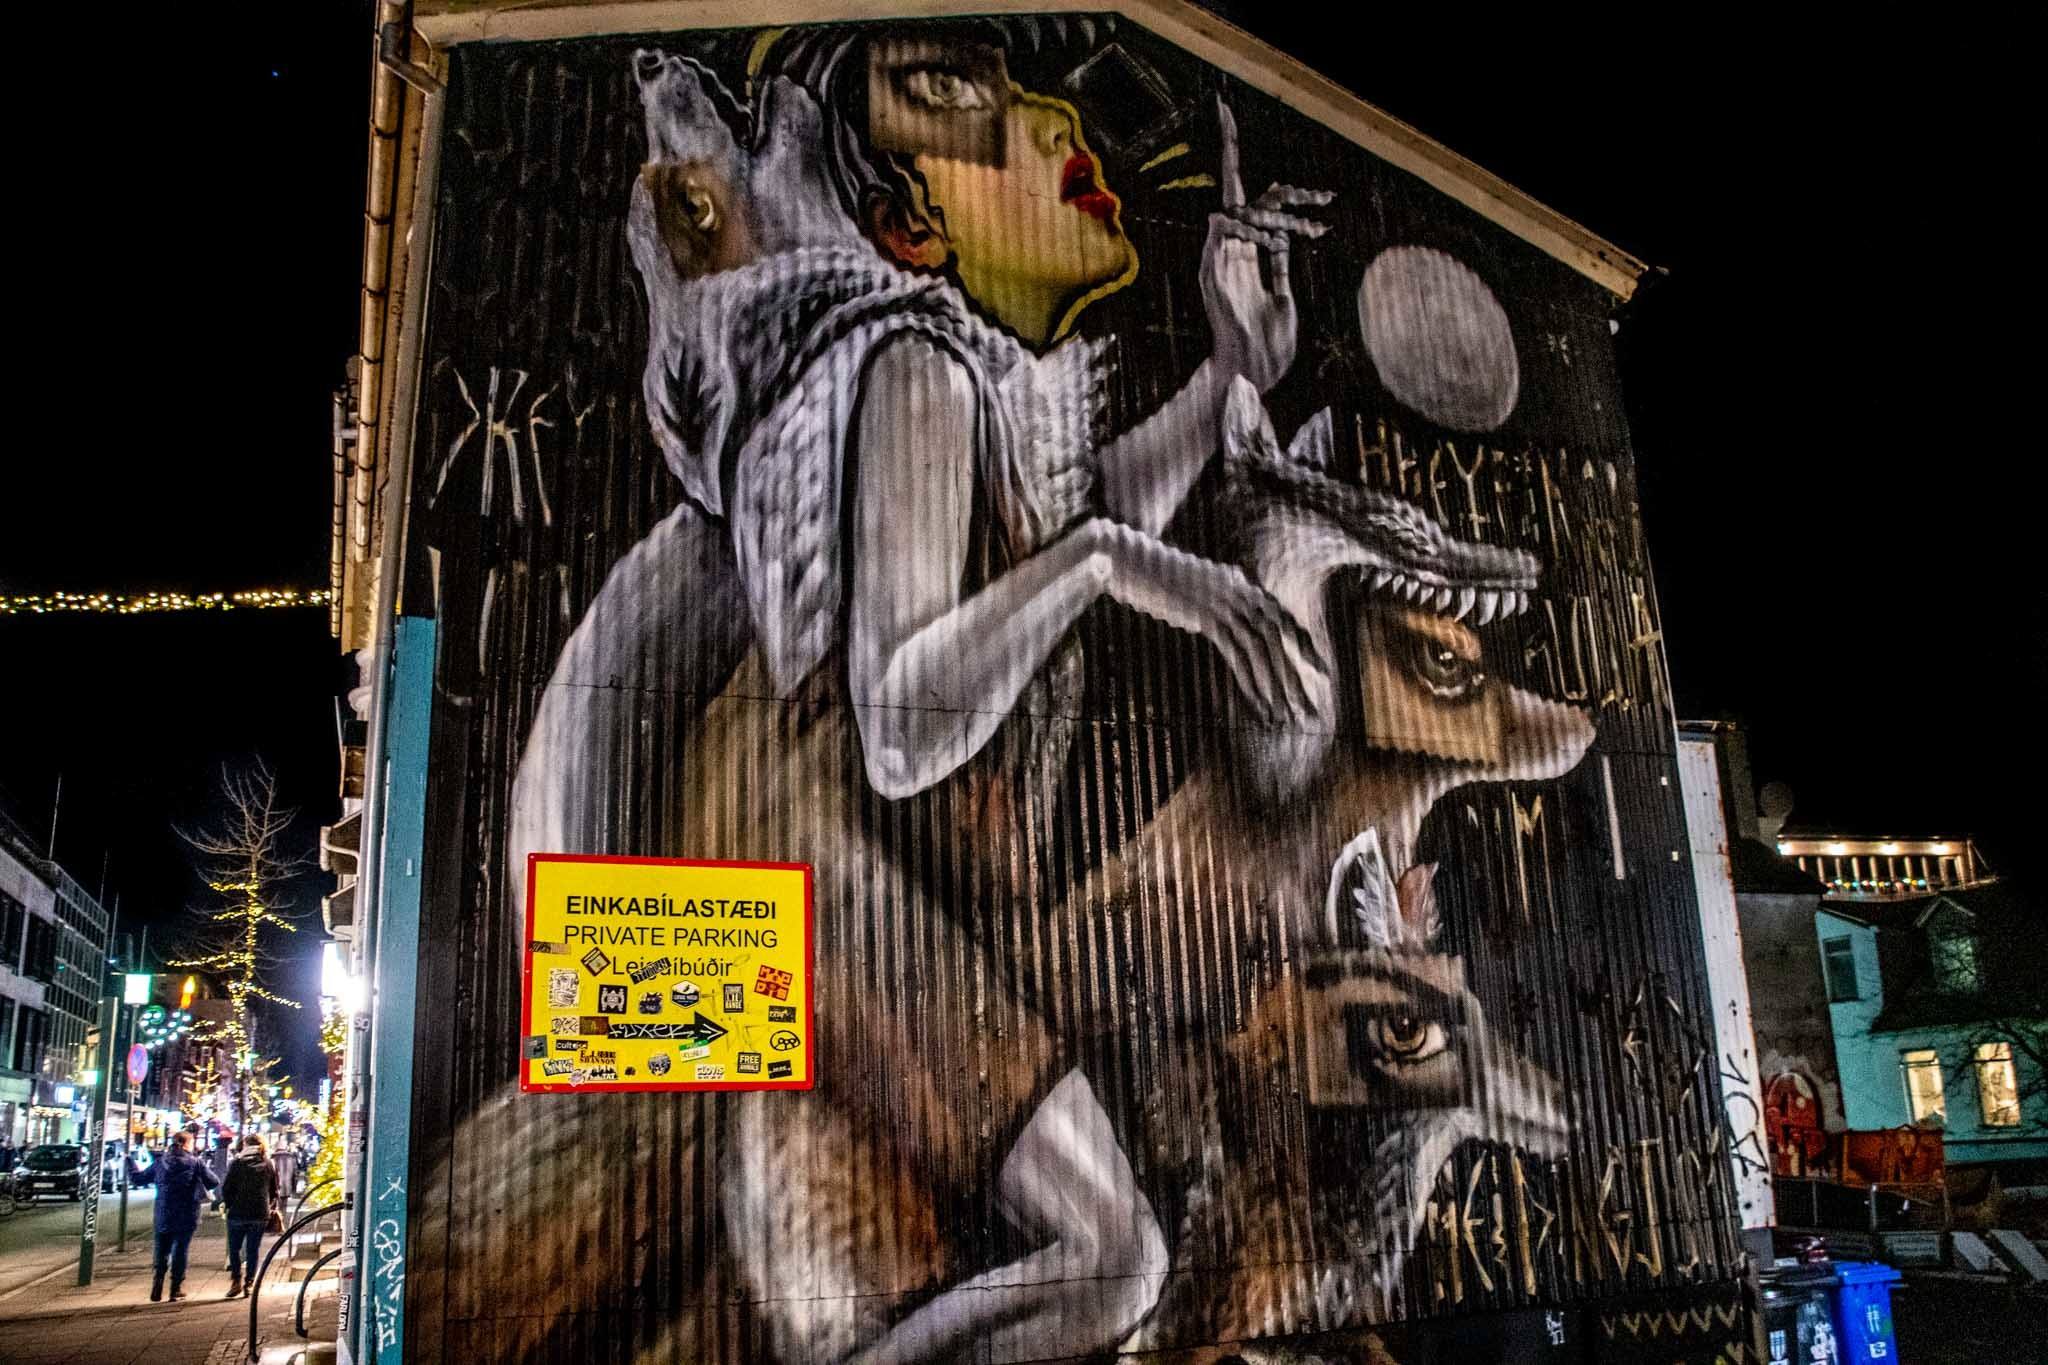 A street art mural featuring a woman and wolves.